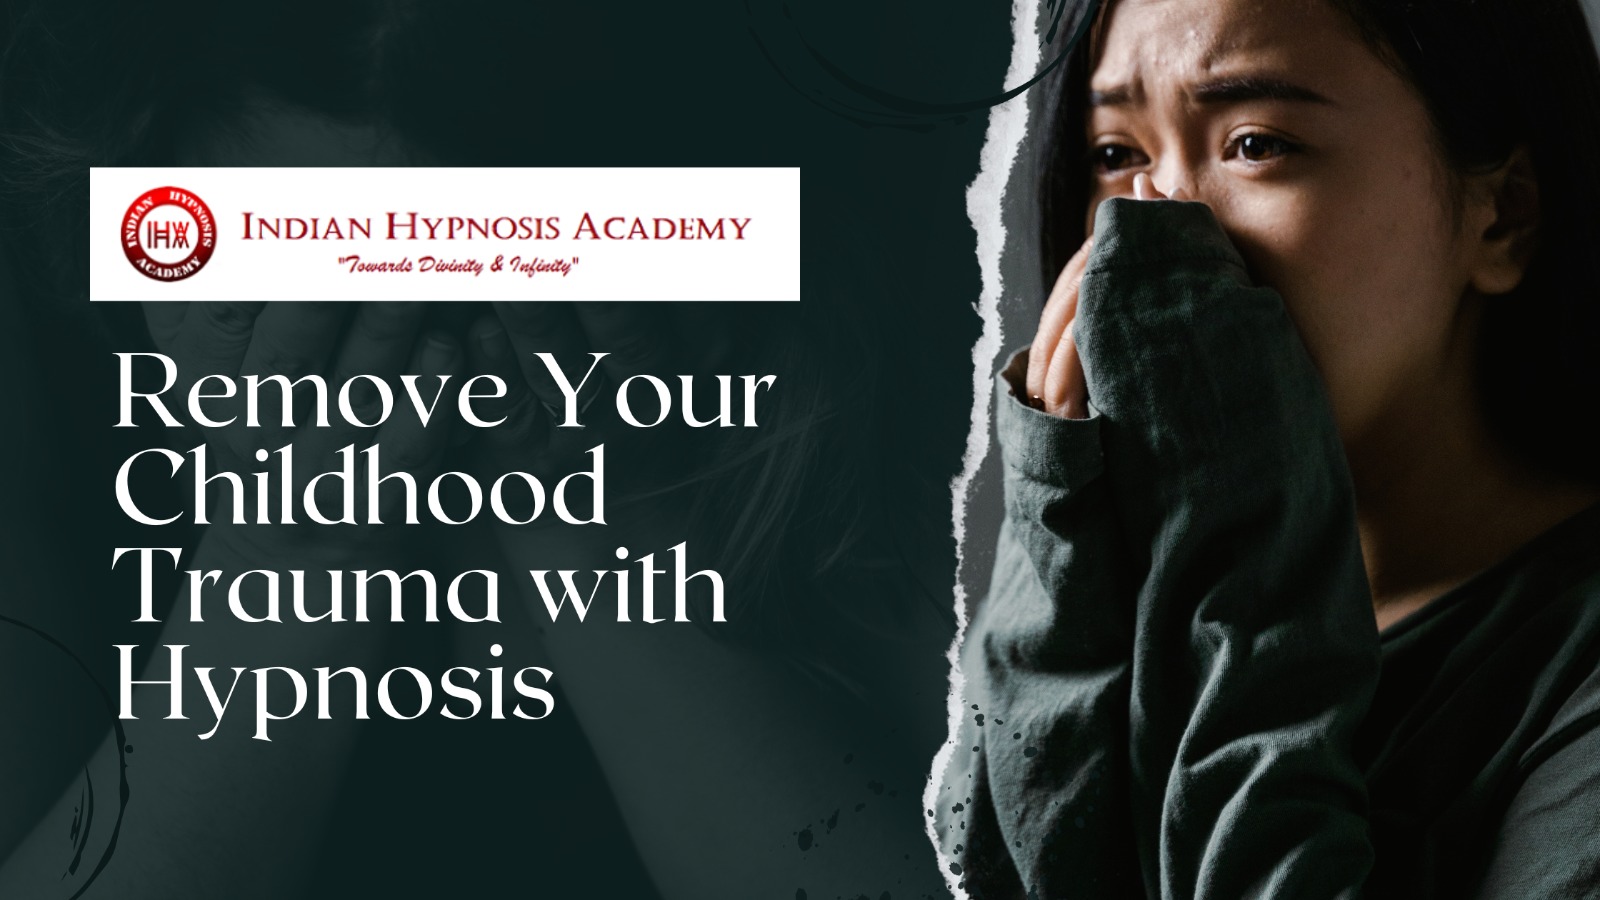 You are currently viewing Remove Your Childhood Trauma with Hypnosis